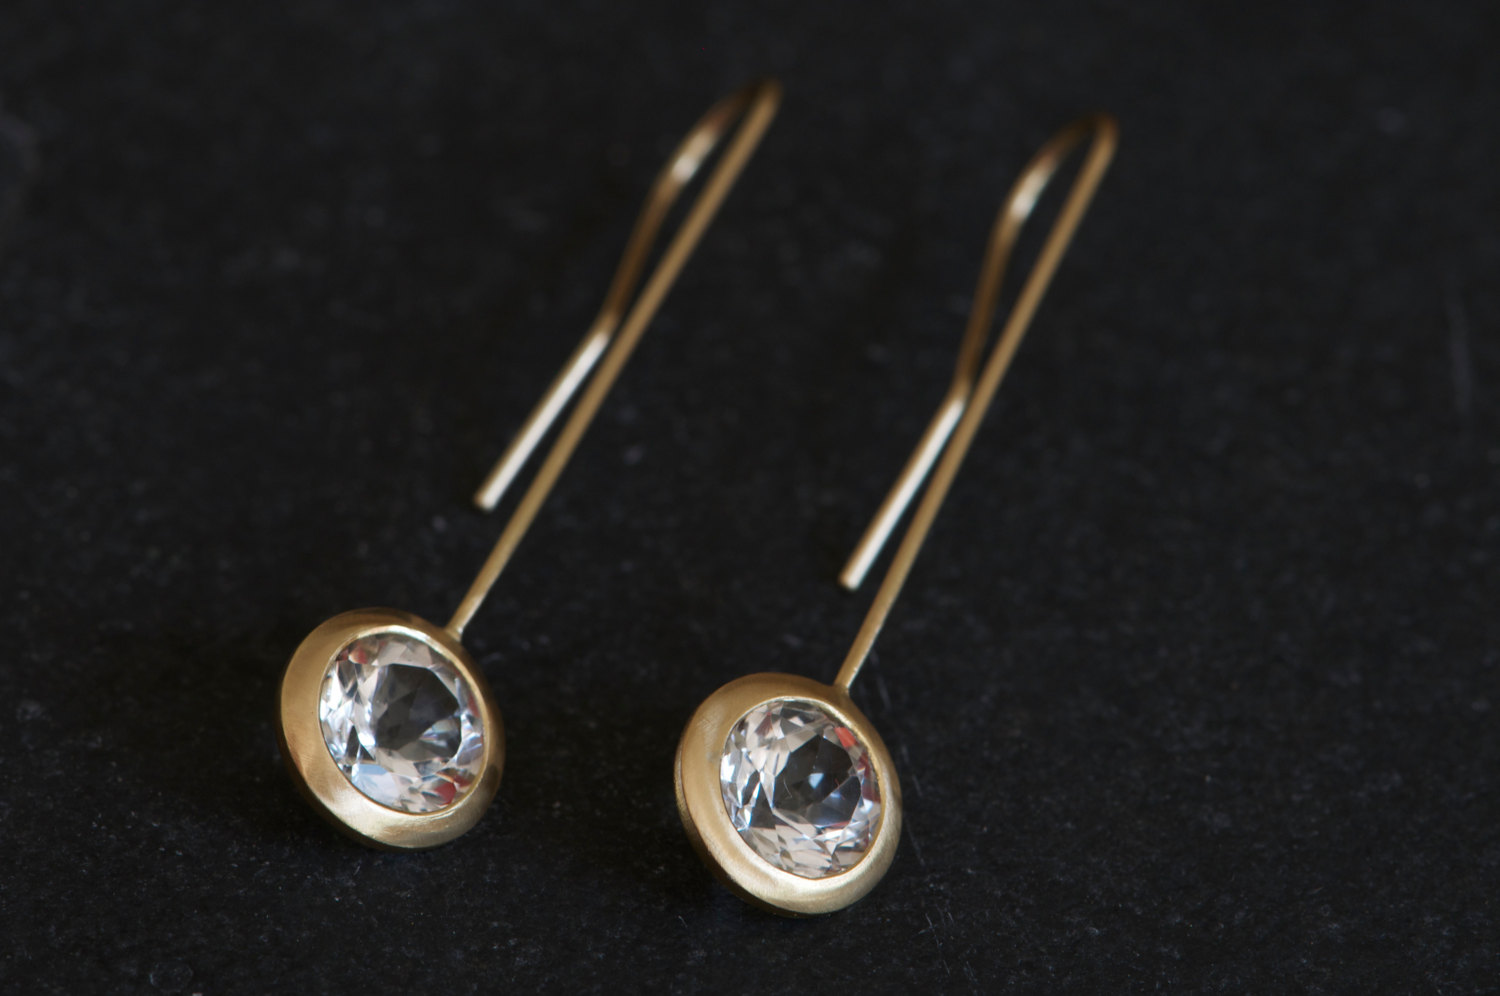 Clean and simple gold and white topaz 'lollipop' earrings. Sparkly white topaz set in 18k gold. Designed and handmade by William White in Cornwall, UK